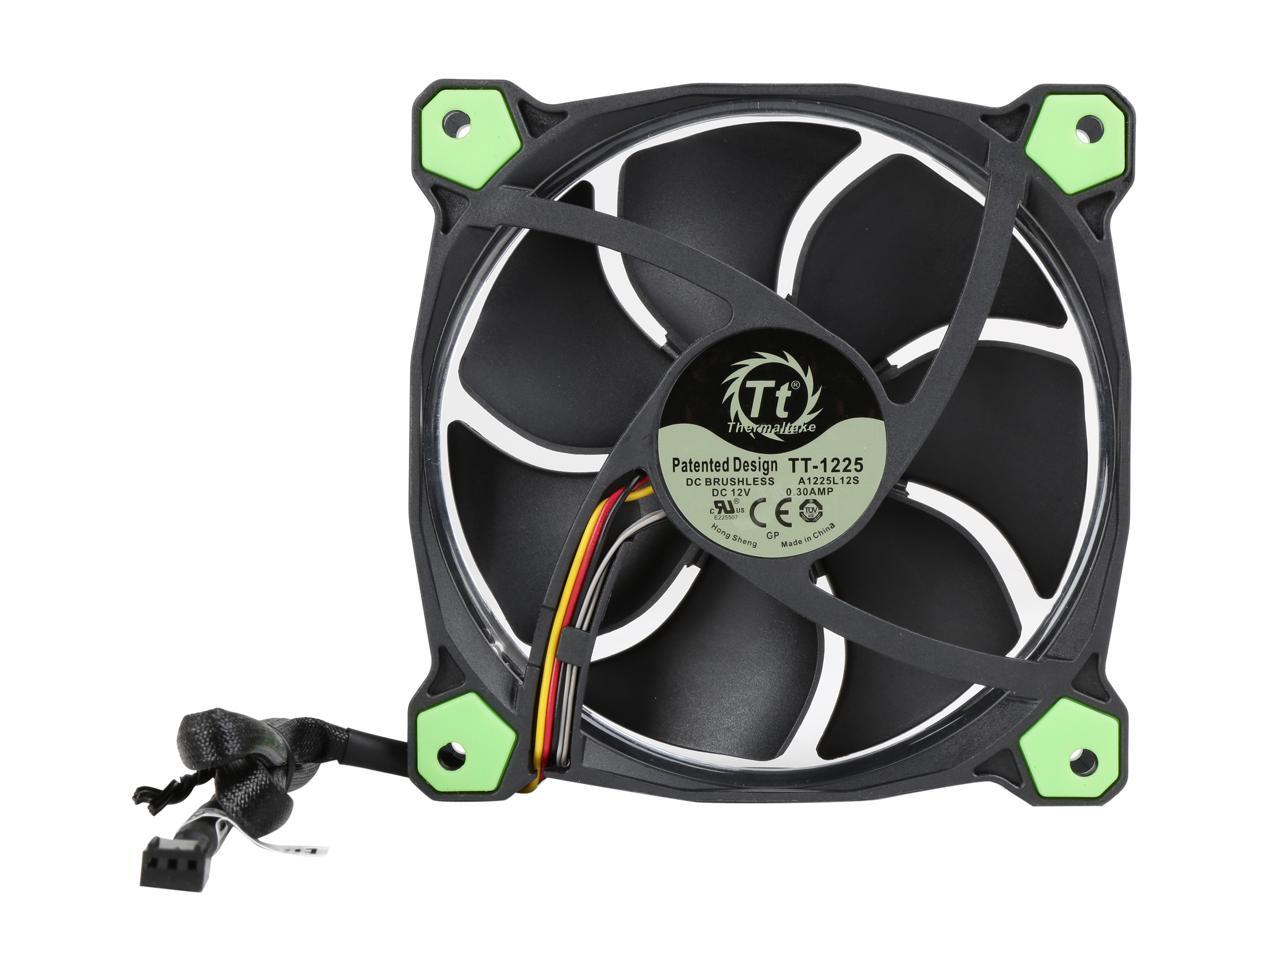 Thermaltake Riing 12 High Static Pressure 120Mm Circular Ring Led Case/Radiator Fan With Anti-Vibration Mounting System - Green - 3 Pks